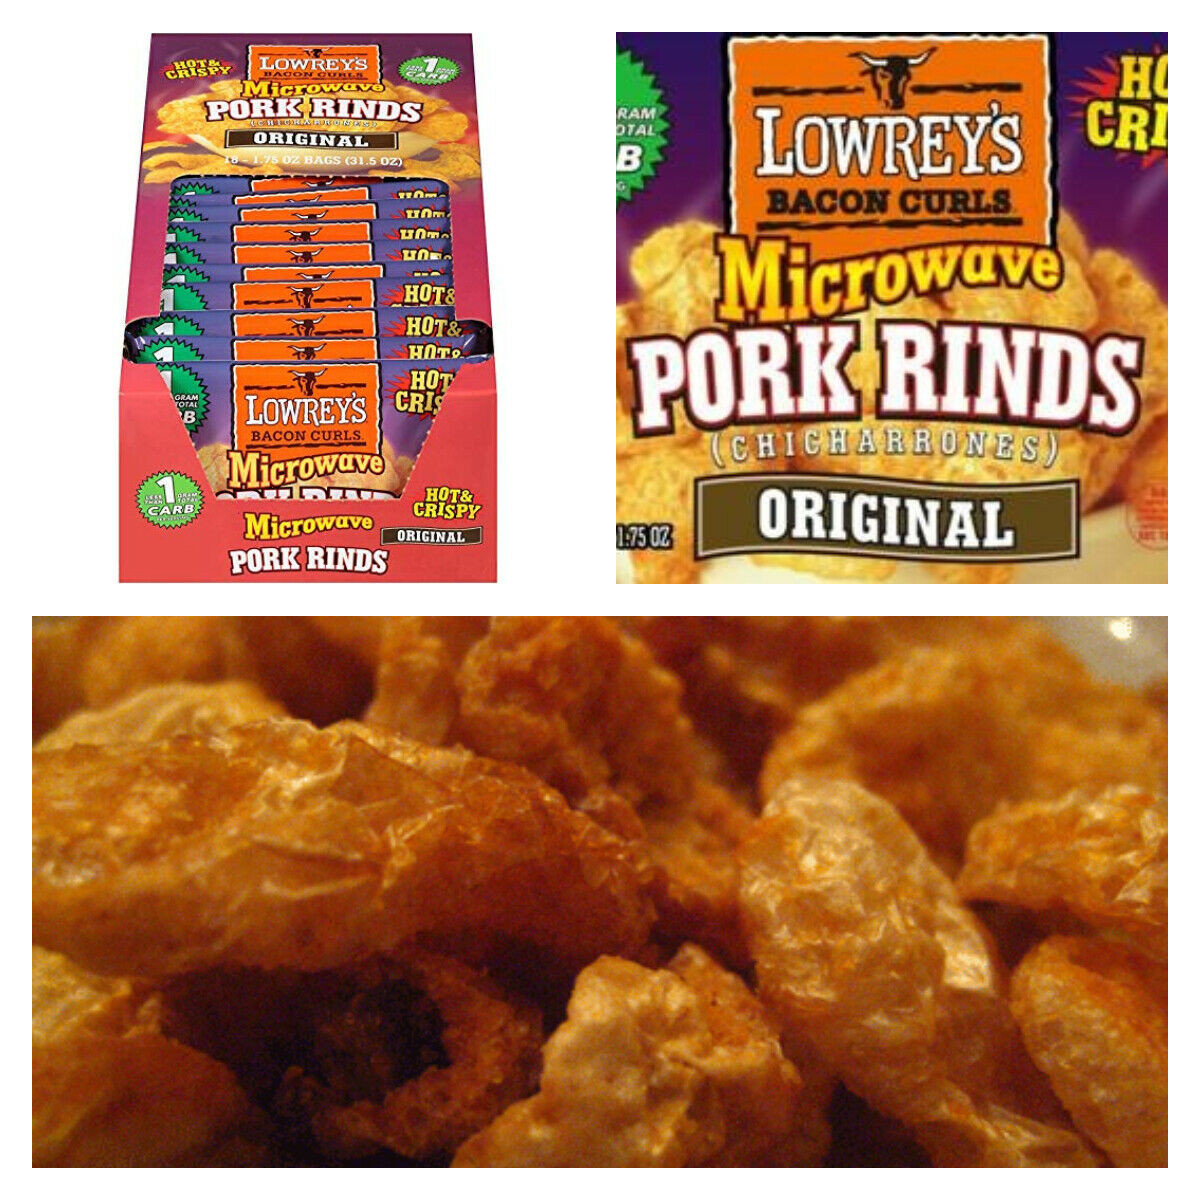 Pork Rinds Low Carb Keto
 Low Carb Carbs Pork Rinds Microwave Bacon Curls